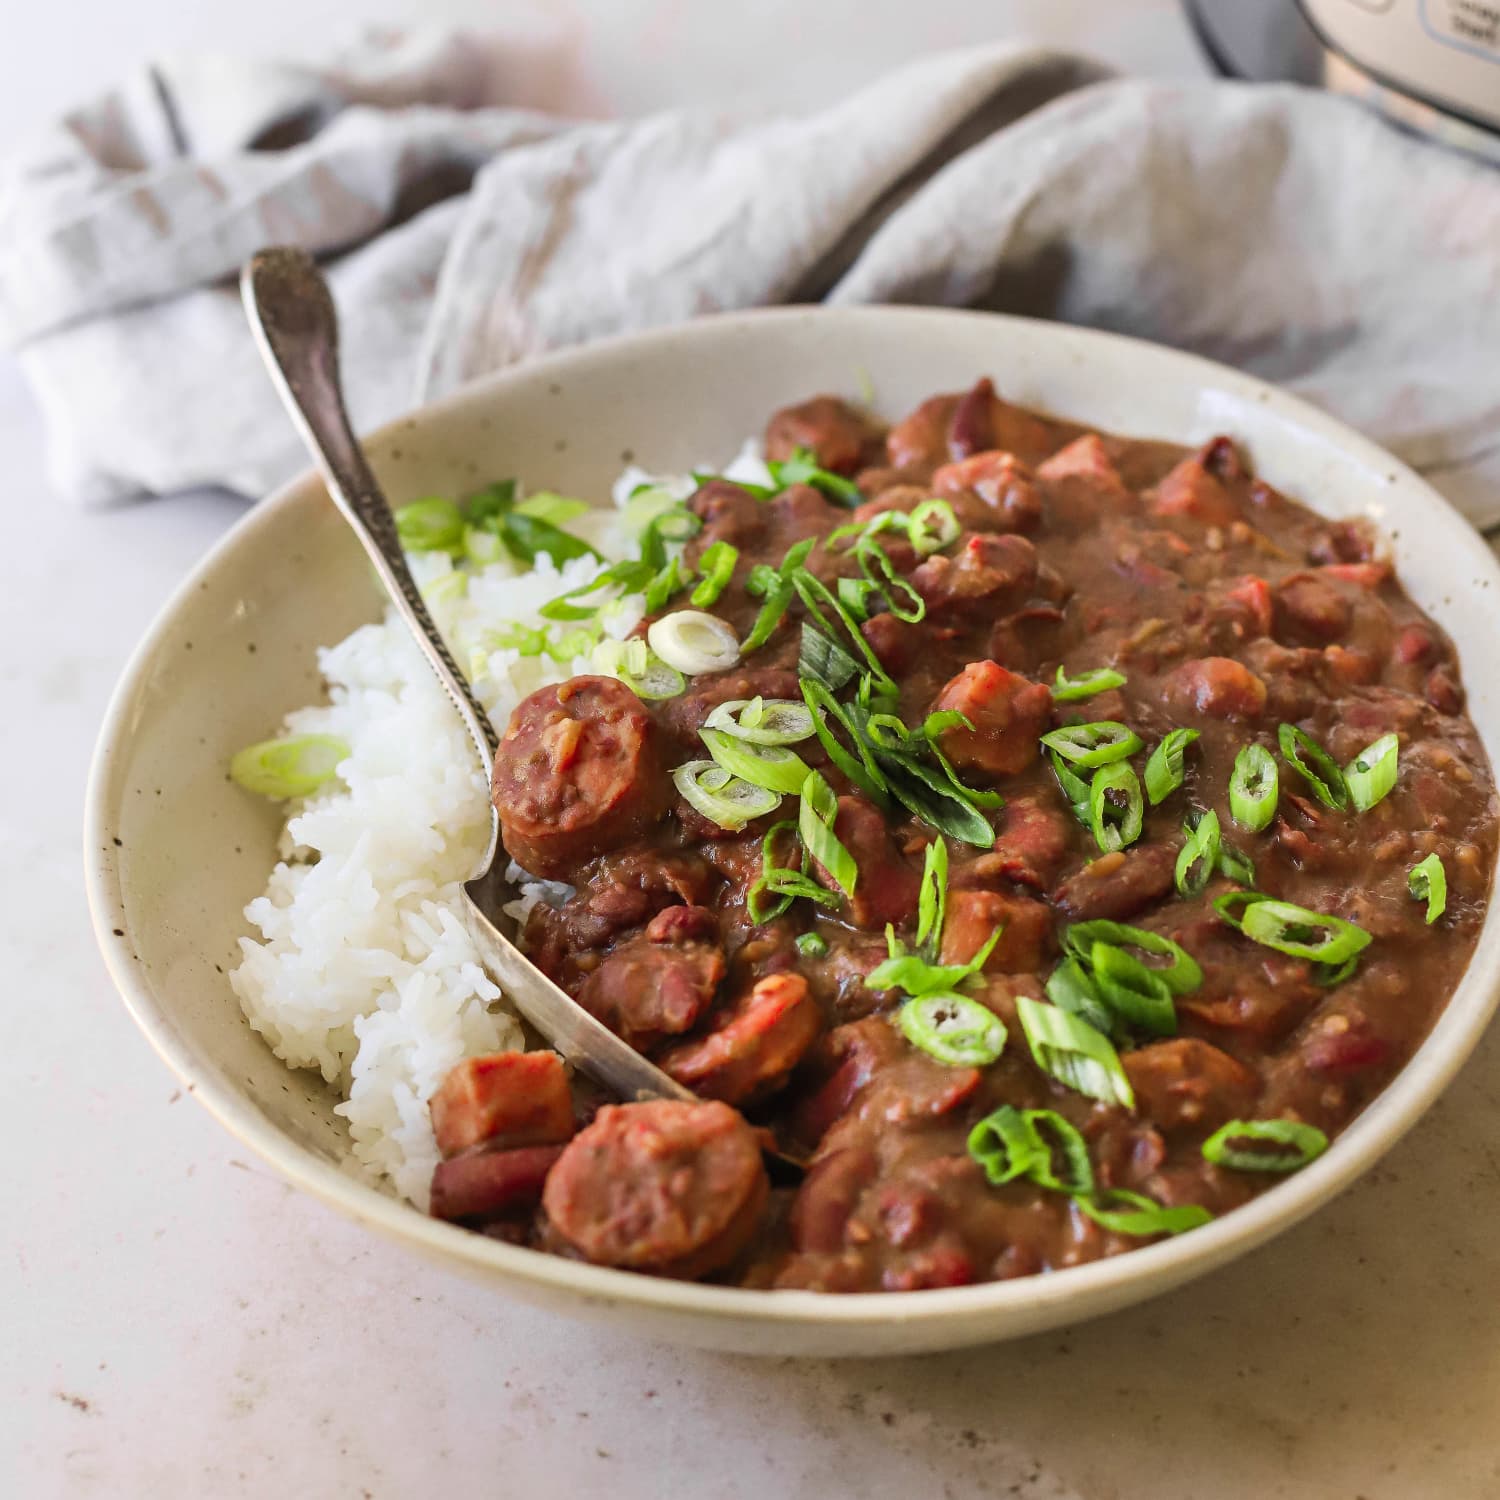 https://cdn.apartmenttherapy.info/image/upload/f_jpg,q_auto:eco,c_fill,g_auto,w_1500,ar_1:1/k%2FEdit%2F2023-01-Instant-Pot-Red-Beans-And-Rice%2FInstant_Pot_Red_Beans_and_Rice-3